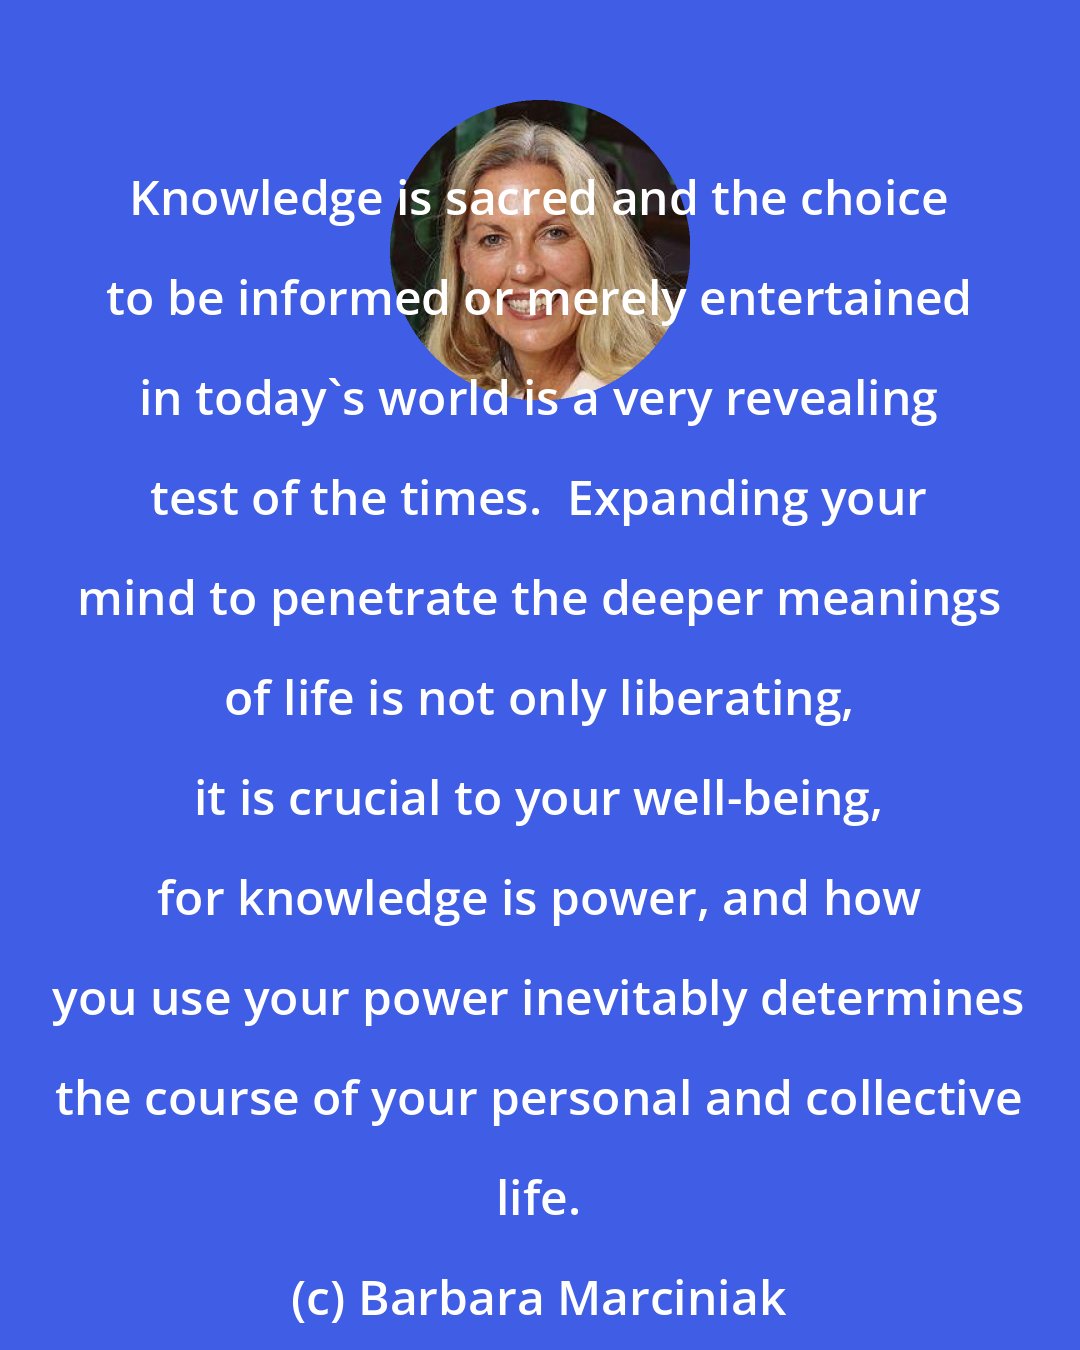 Barbara Marciniak: Knowledge is sacred and the choice to be informed or merely entertained in today's world is a very revealing test of the times.  Expanding your mind to penetrate the deeper meanings of life is not only liberating, it is crucial to your well-being, for knowledge is power, and how you use your power inevitably determines the course of your personal and collective life.